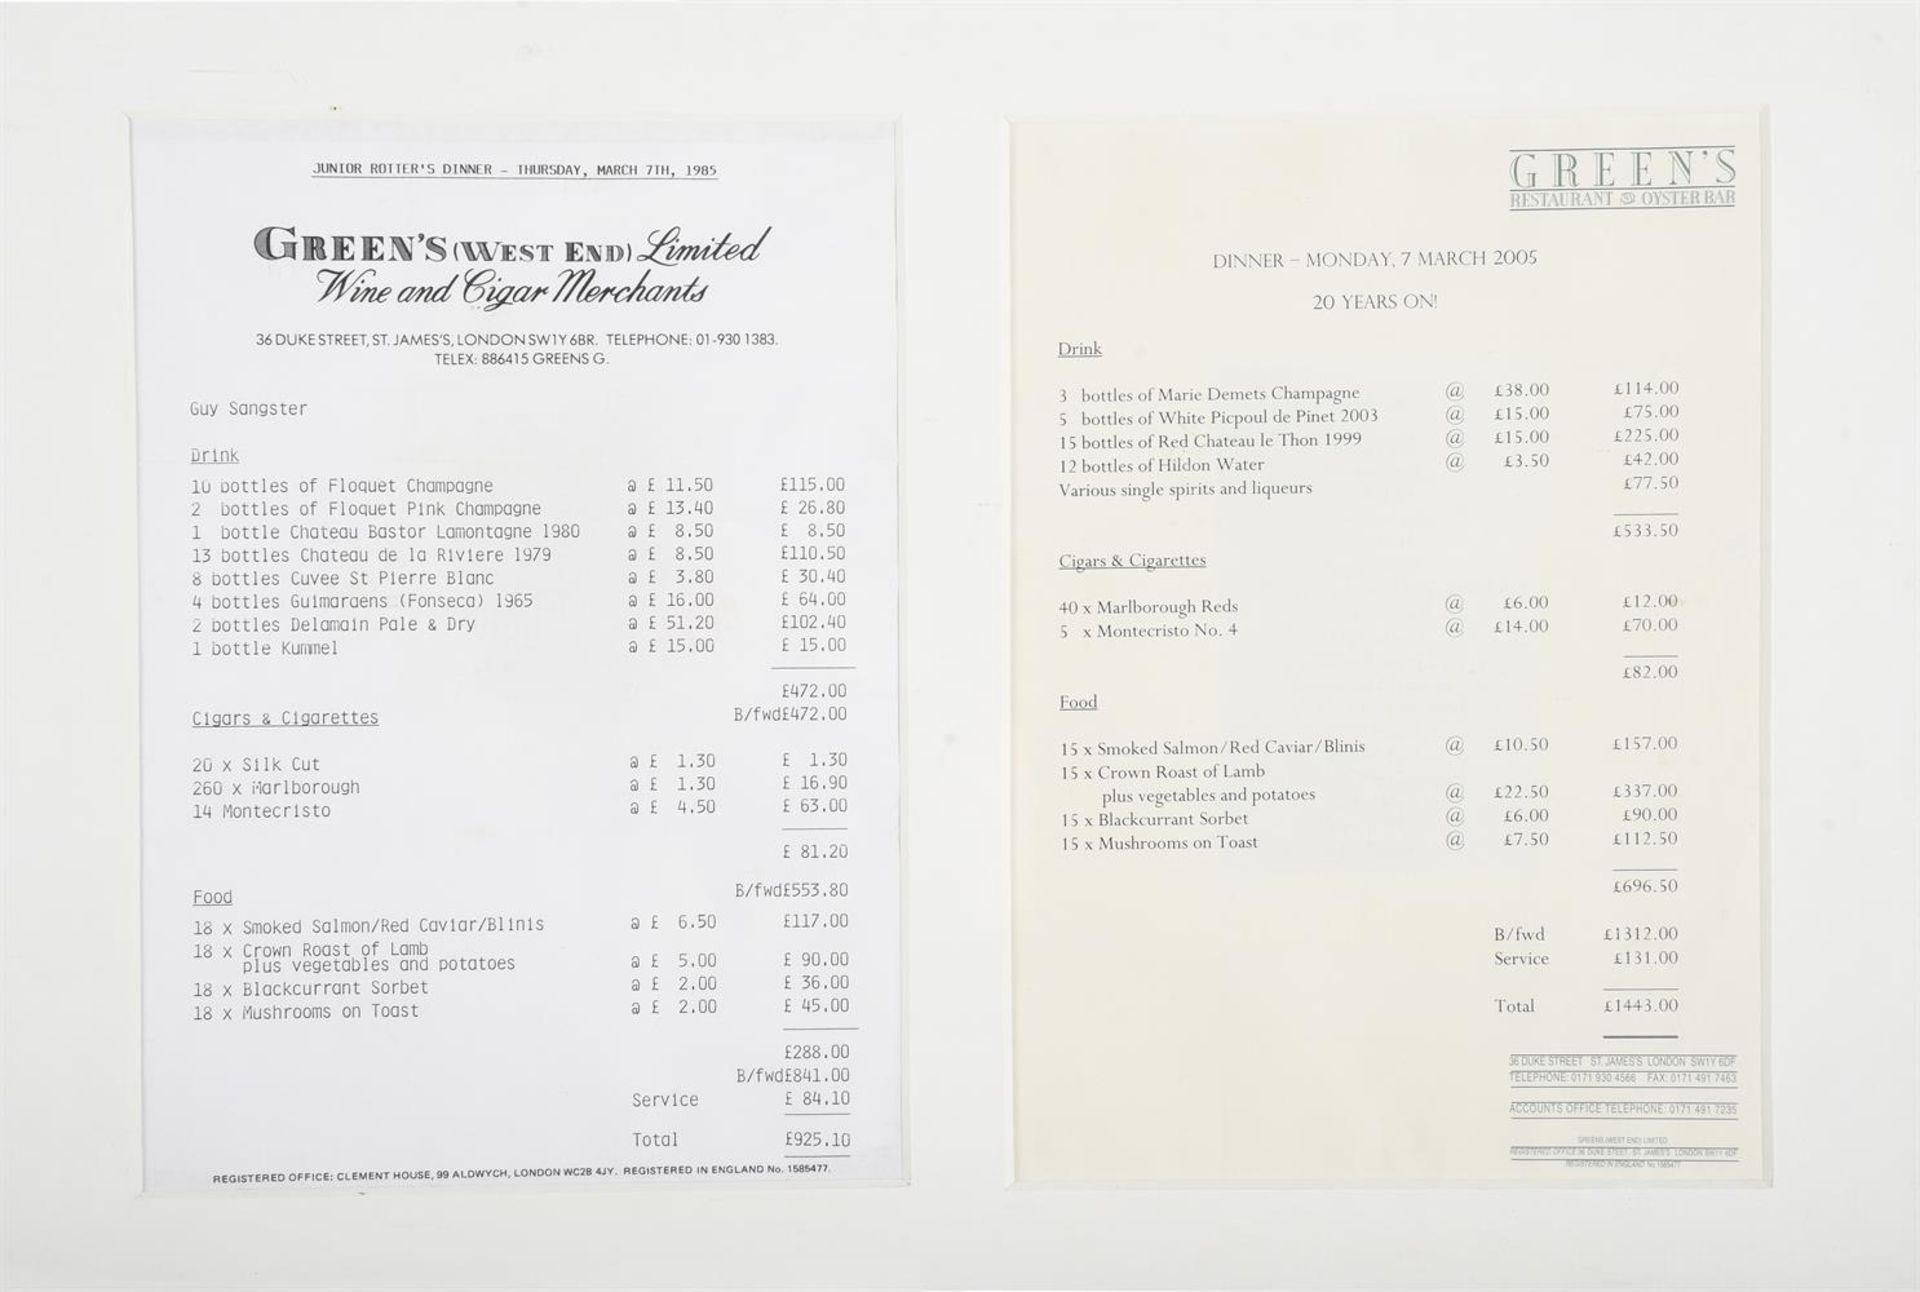 Green's Junior Rotter's dinner menu, 7th March 1985 - Image 2 of 6